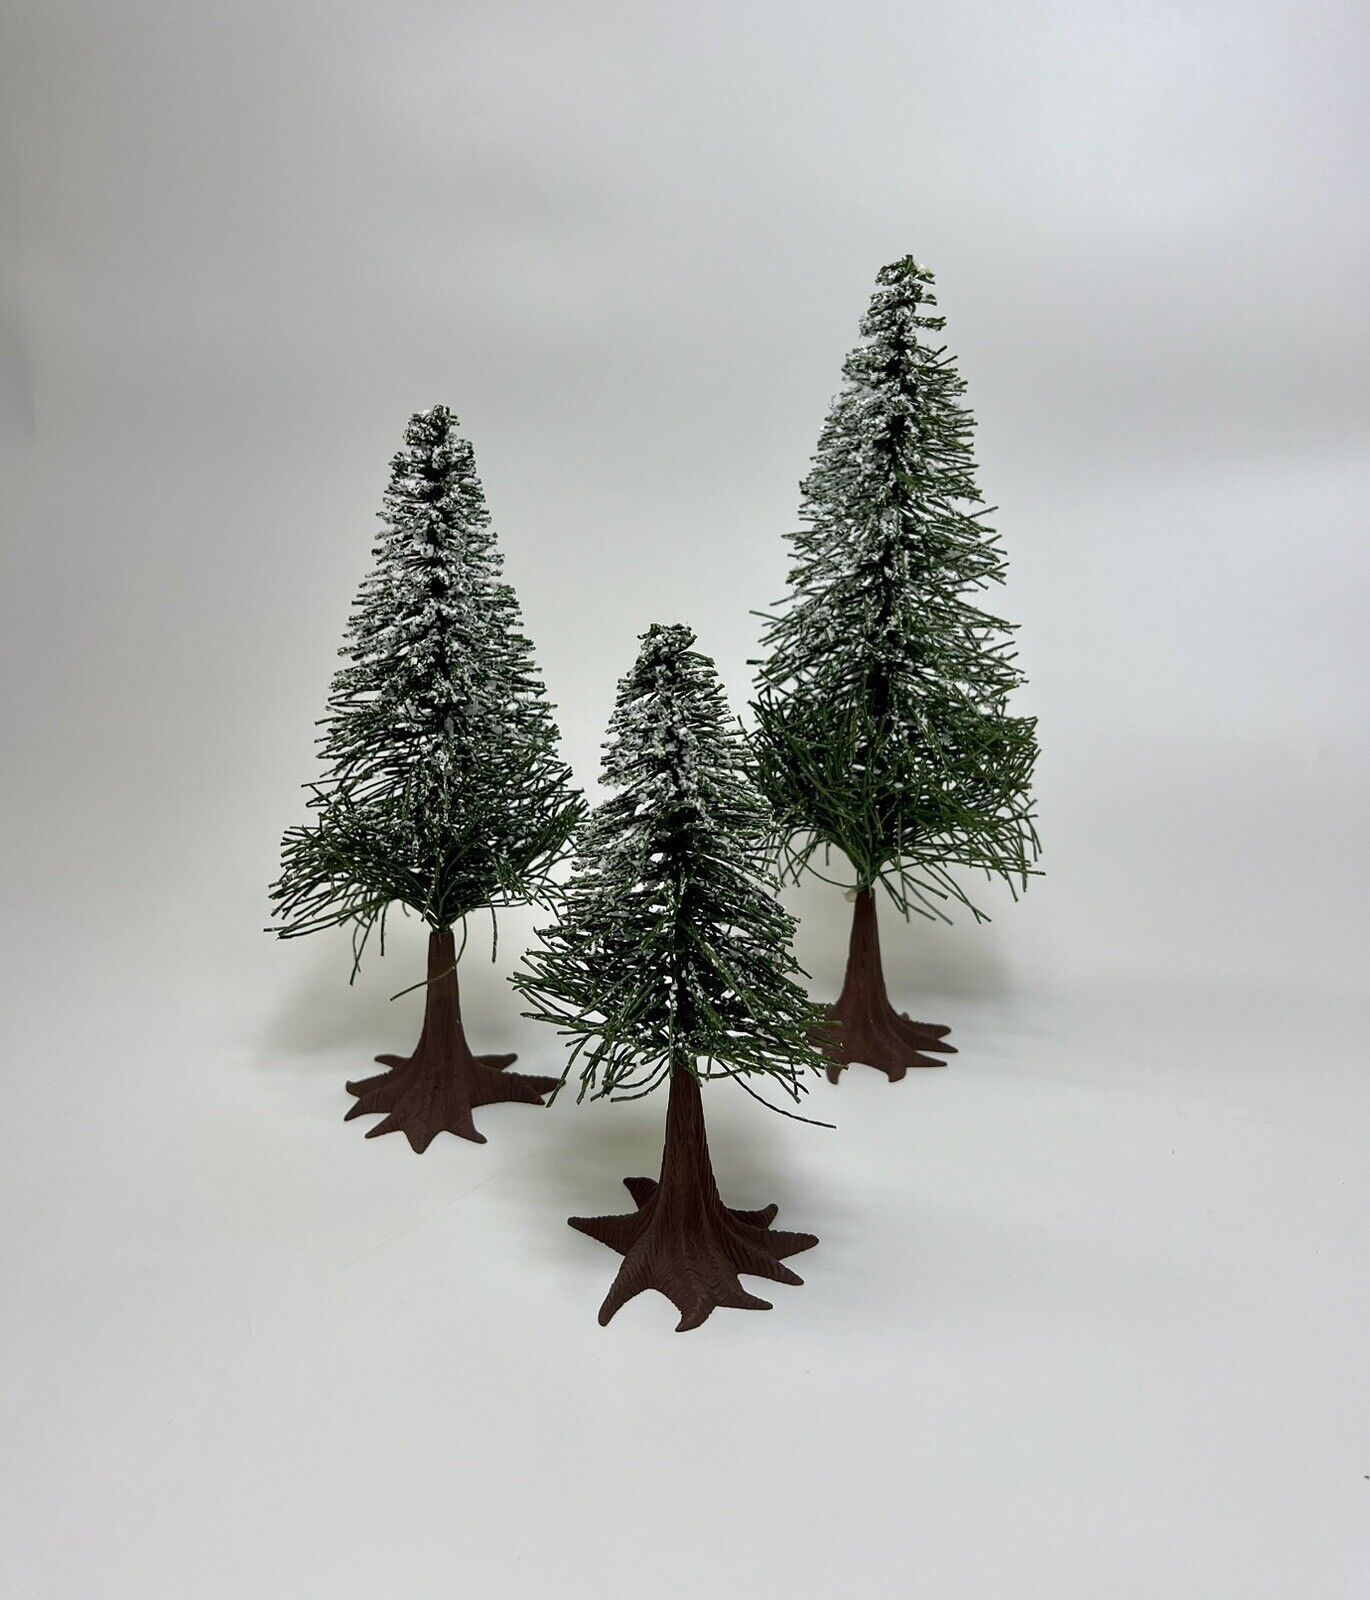 DEPT 56 FROSTED NORWAY PINES #5175-6 SET OF 3 Christmas Snow Village